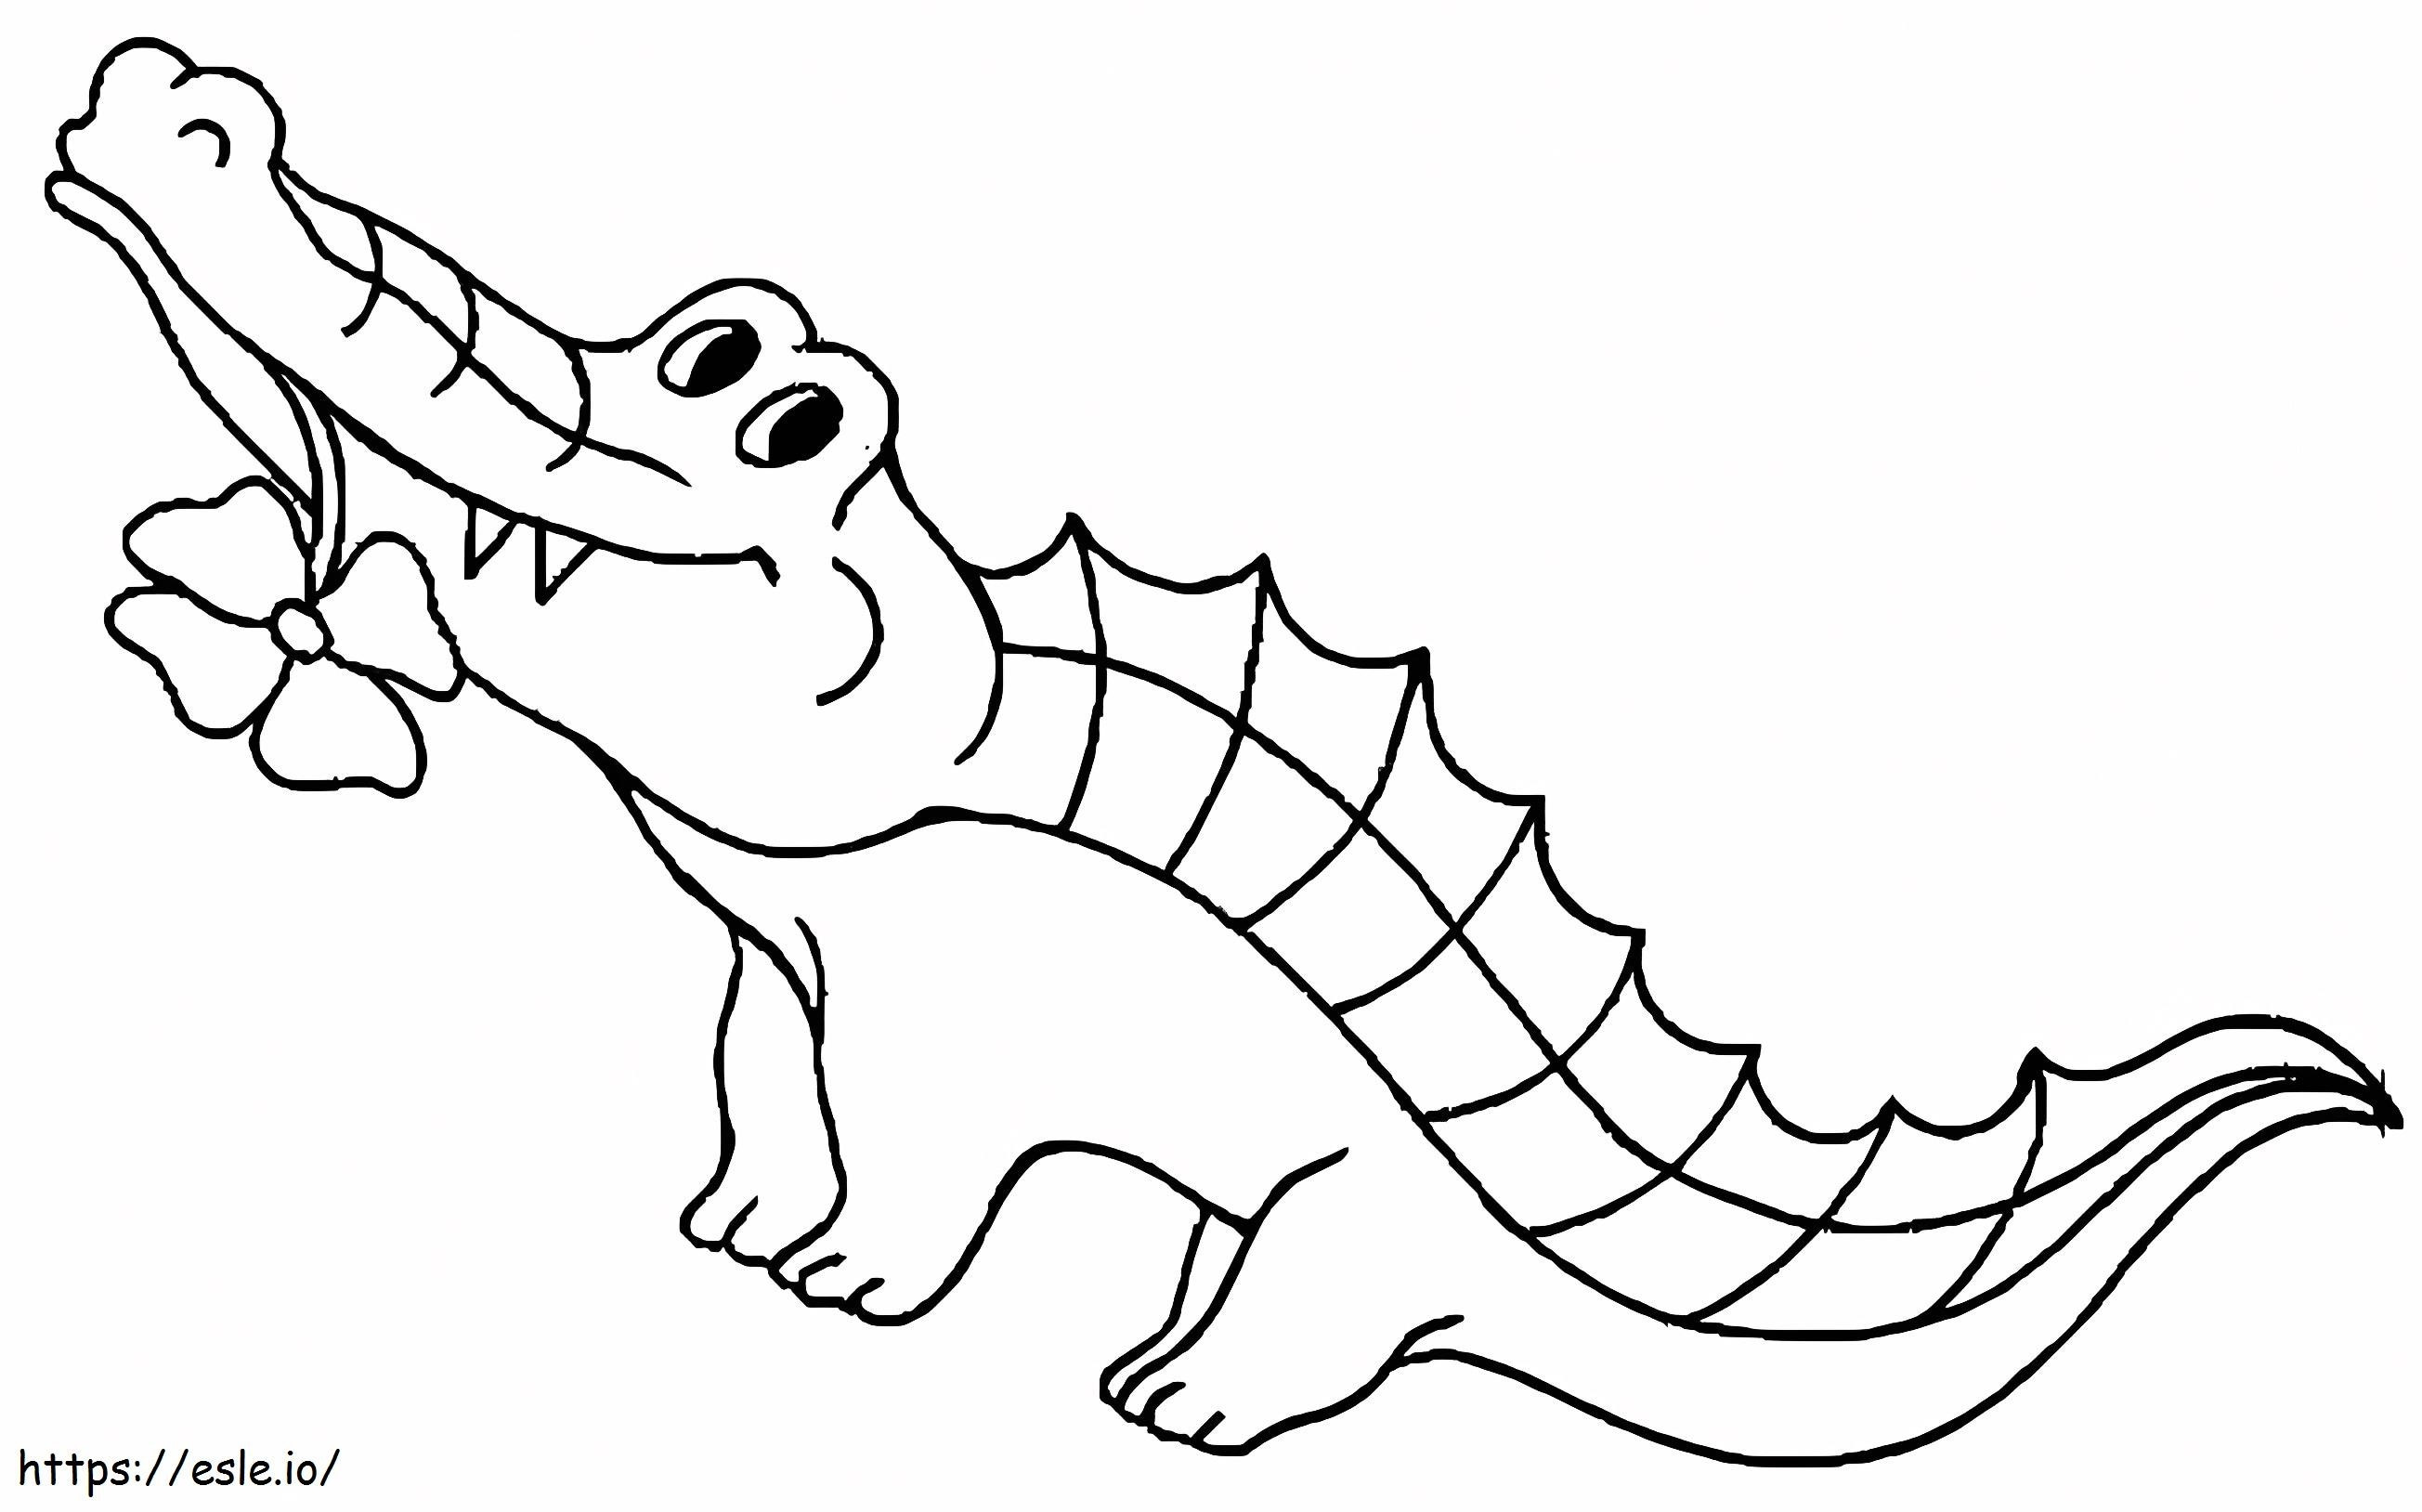 Crocodile And Flower coloring page